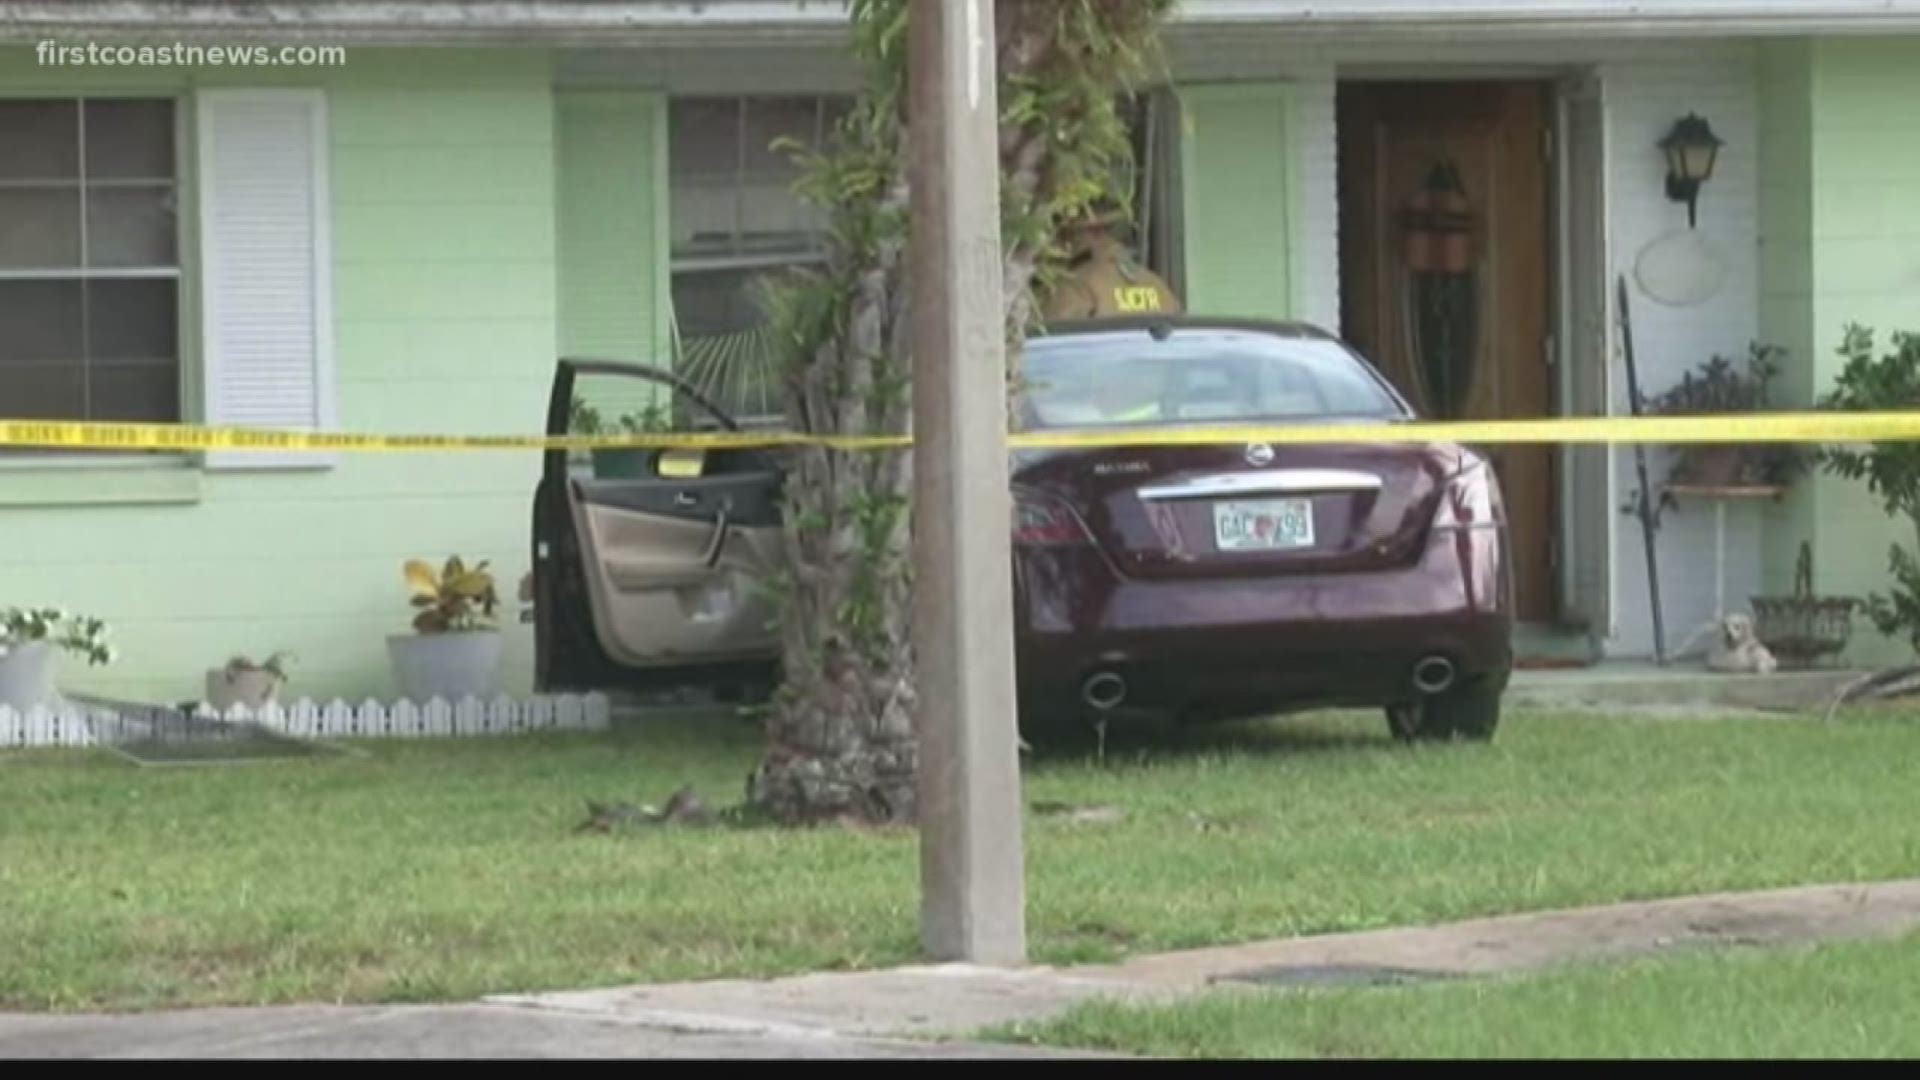 A man is facing multiple charges including attempted homicide Sunday after St. Johns deputies say he crashed his car into a home while attempting to mow down another person.